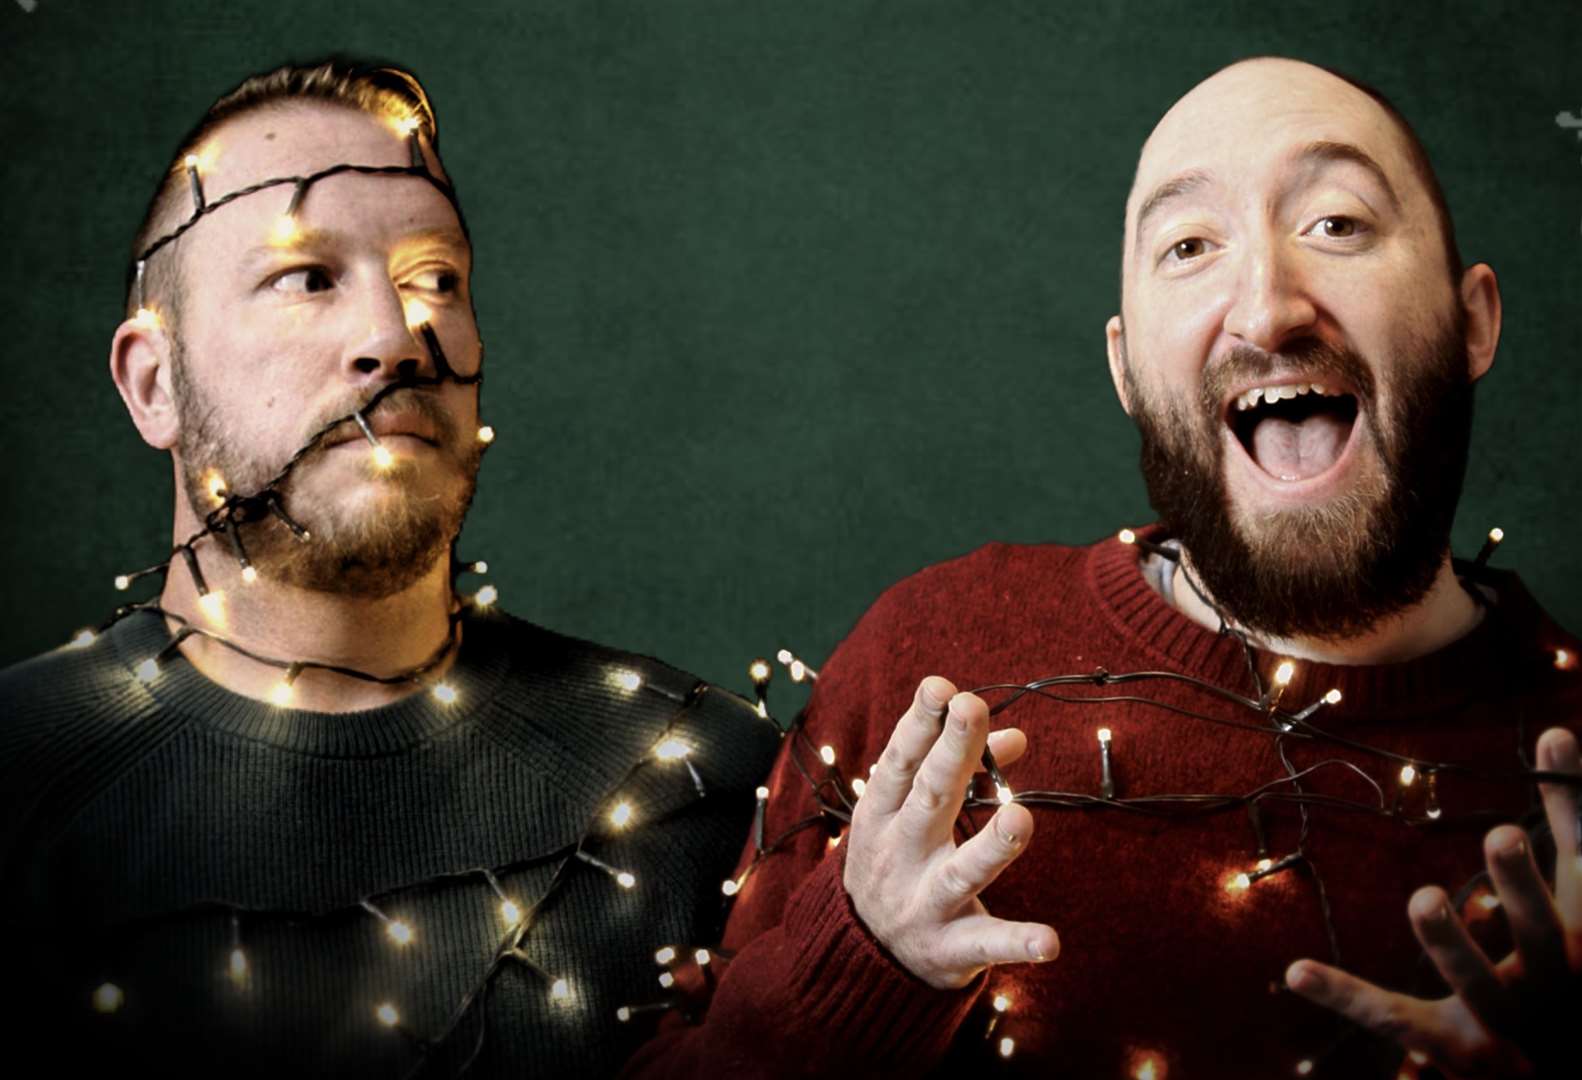 A photo of Stuart and James from a poster for the pair's Christmas song. Picture: Stuart Weller